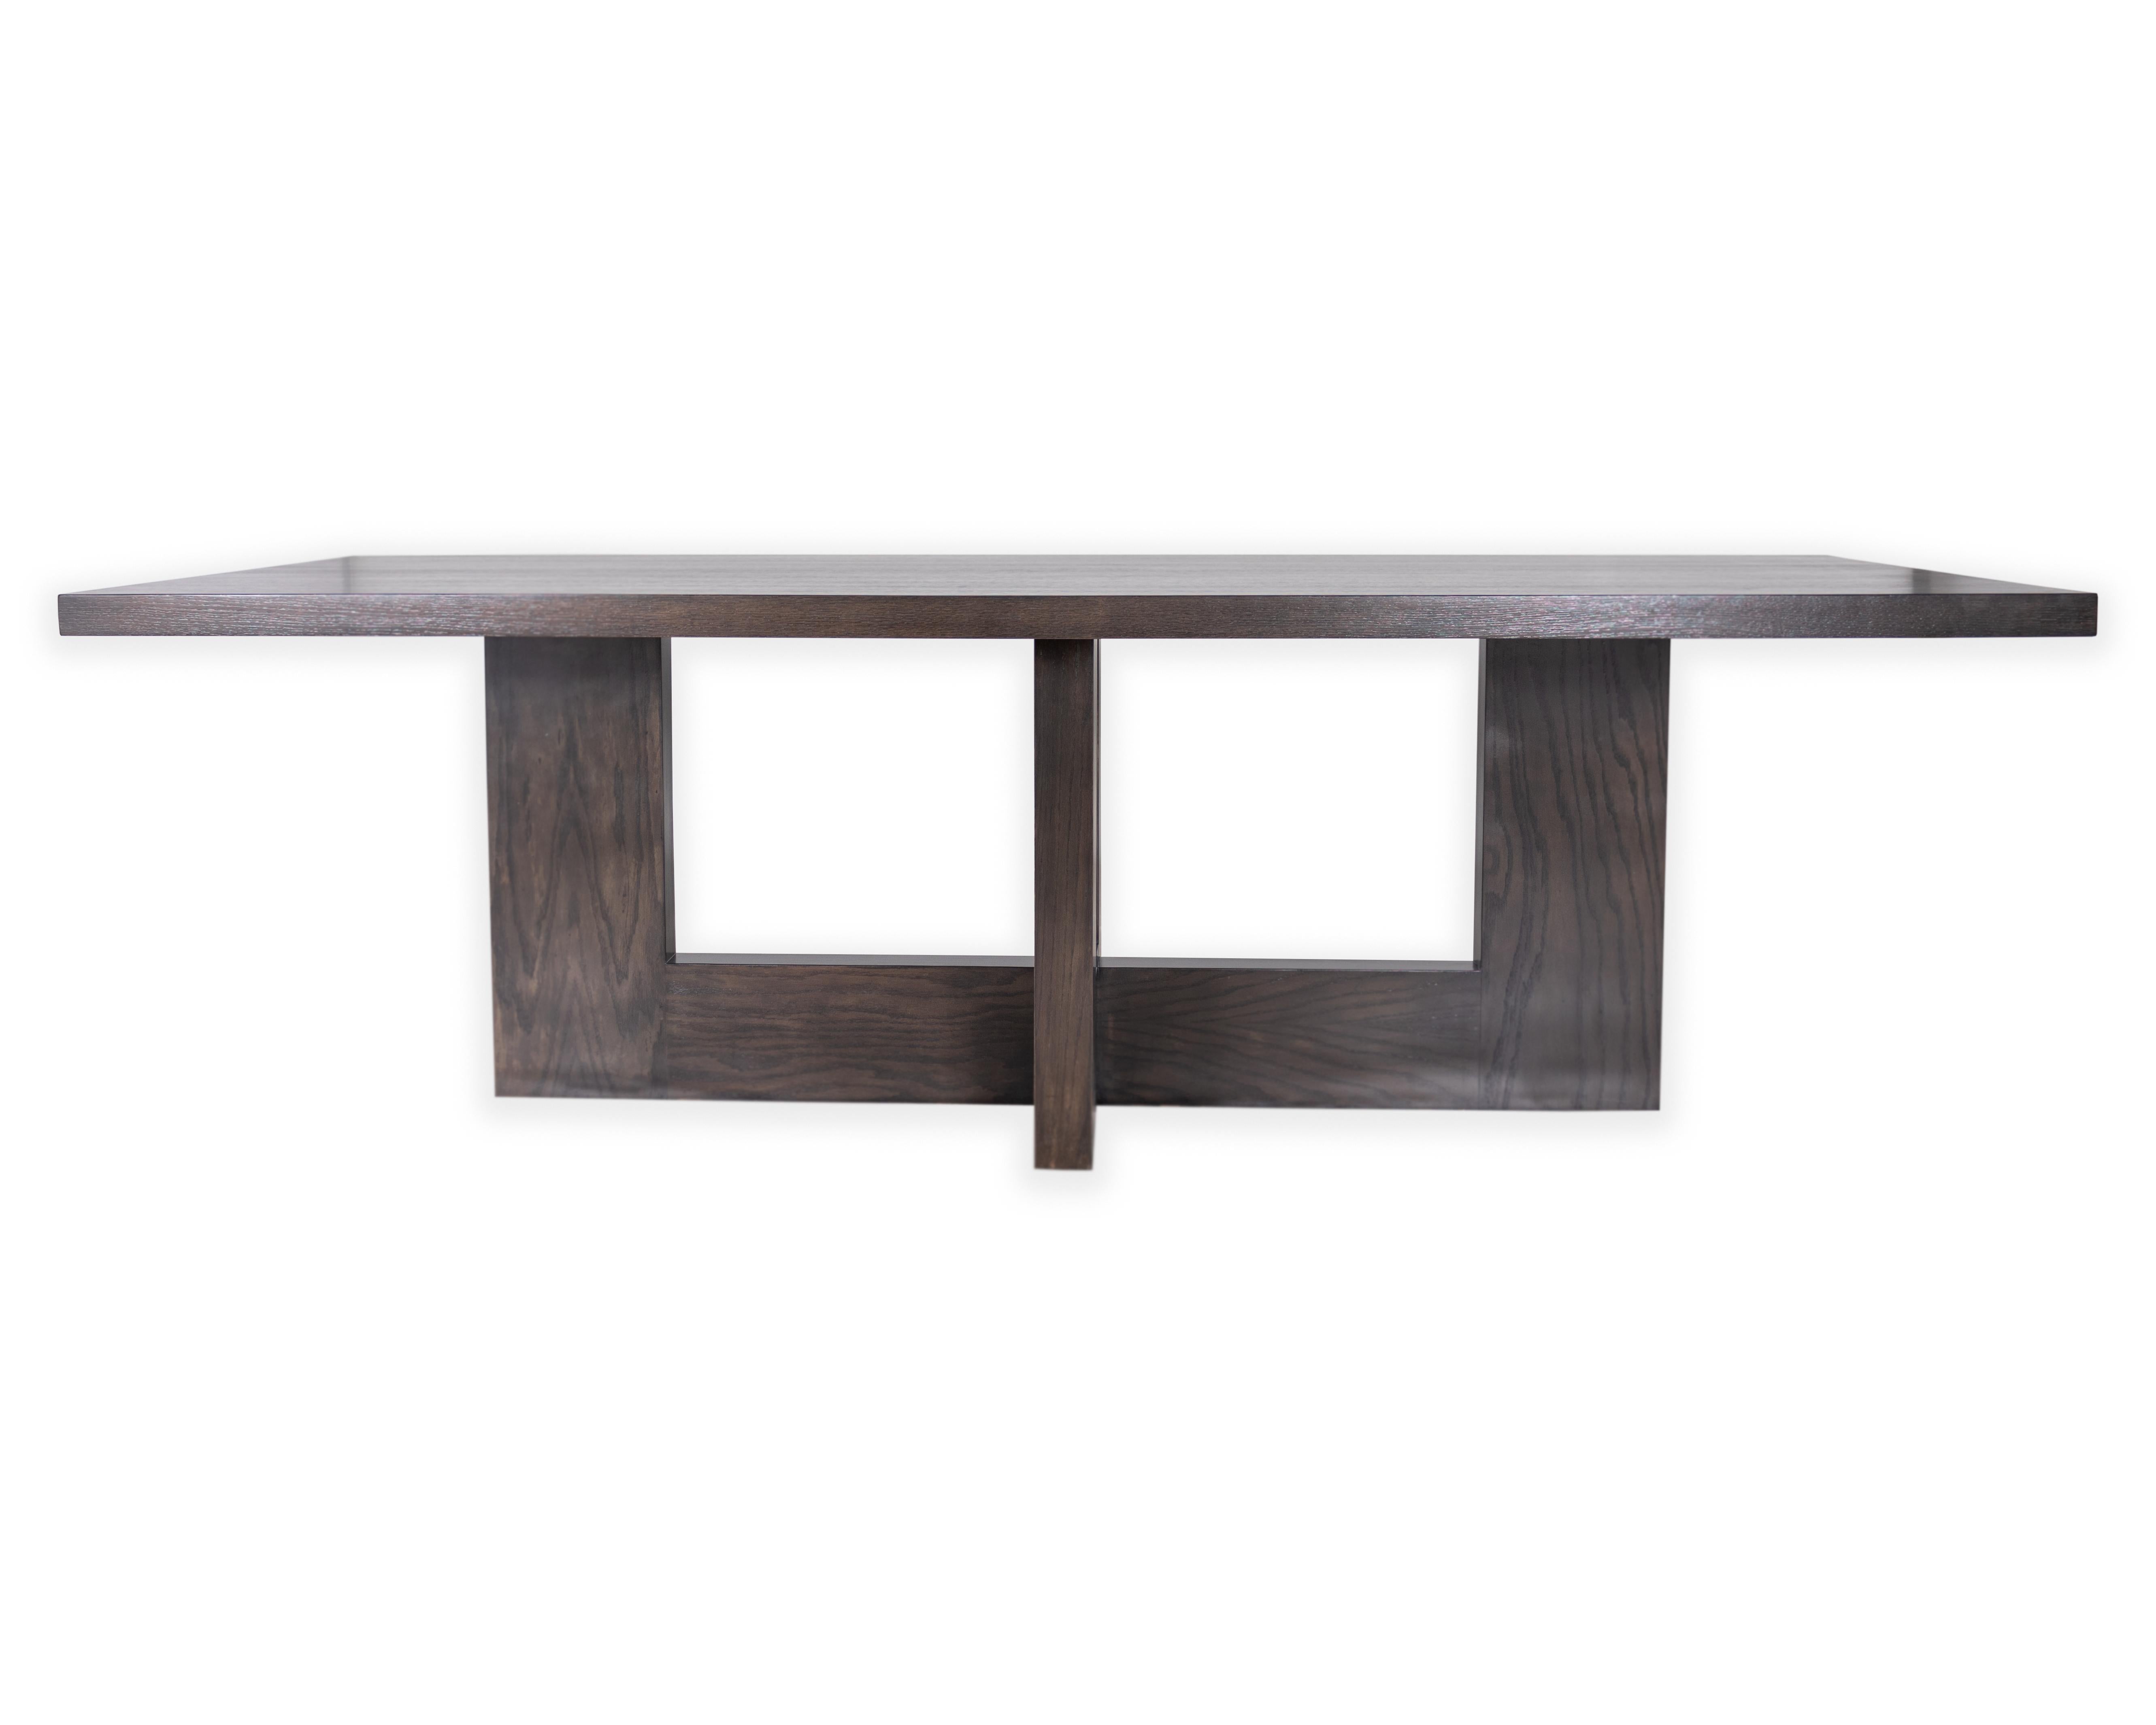 Modernist dining table in Richmond finish top and Onyx finish base. 

Designed by Brendan Bass for the Vision and Design Collection, by using high quality materials and textures. All materials are sourced from local vendors throughout the state of